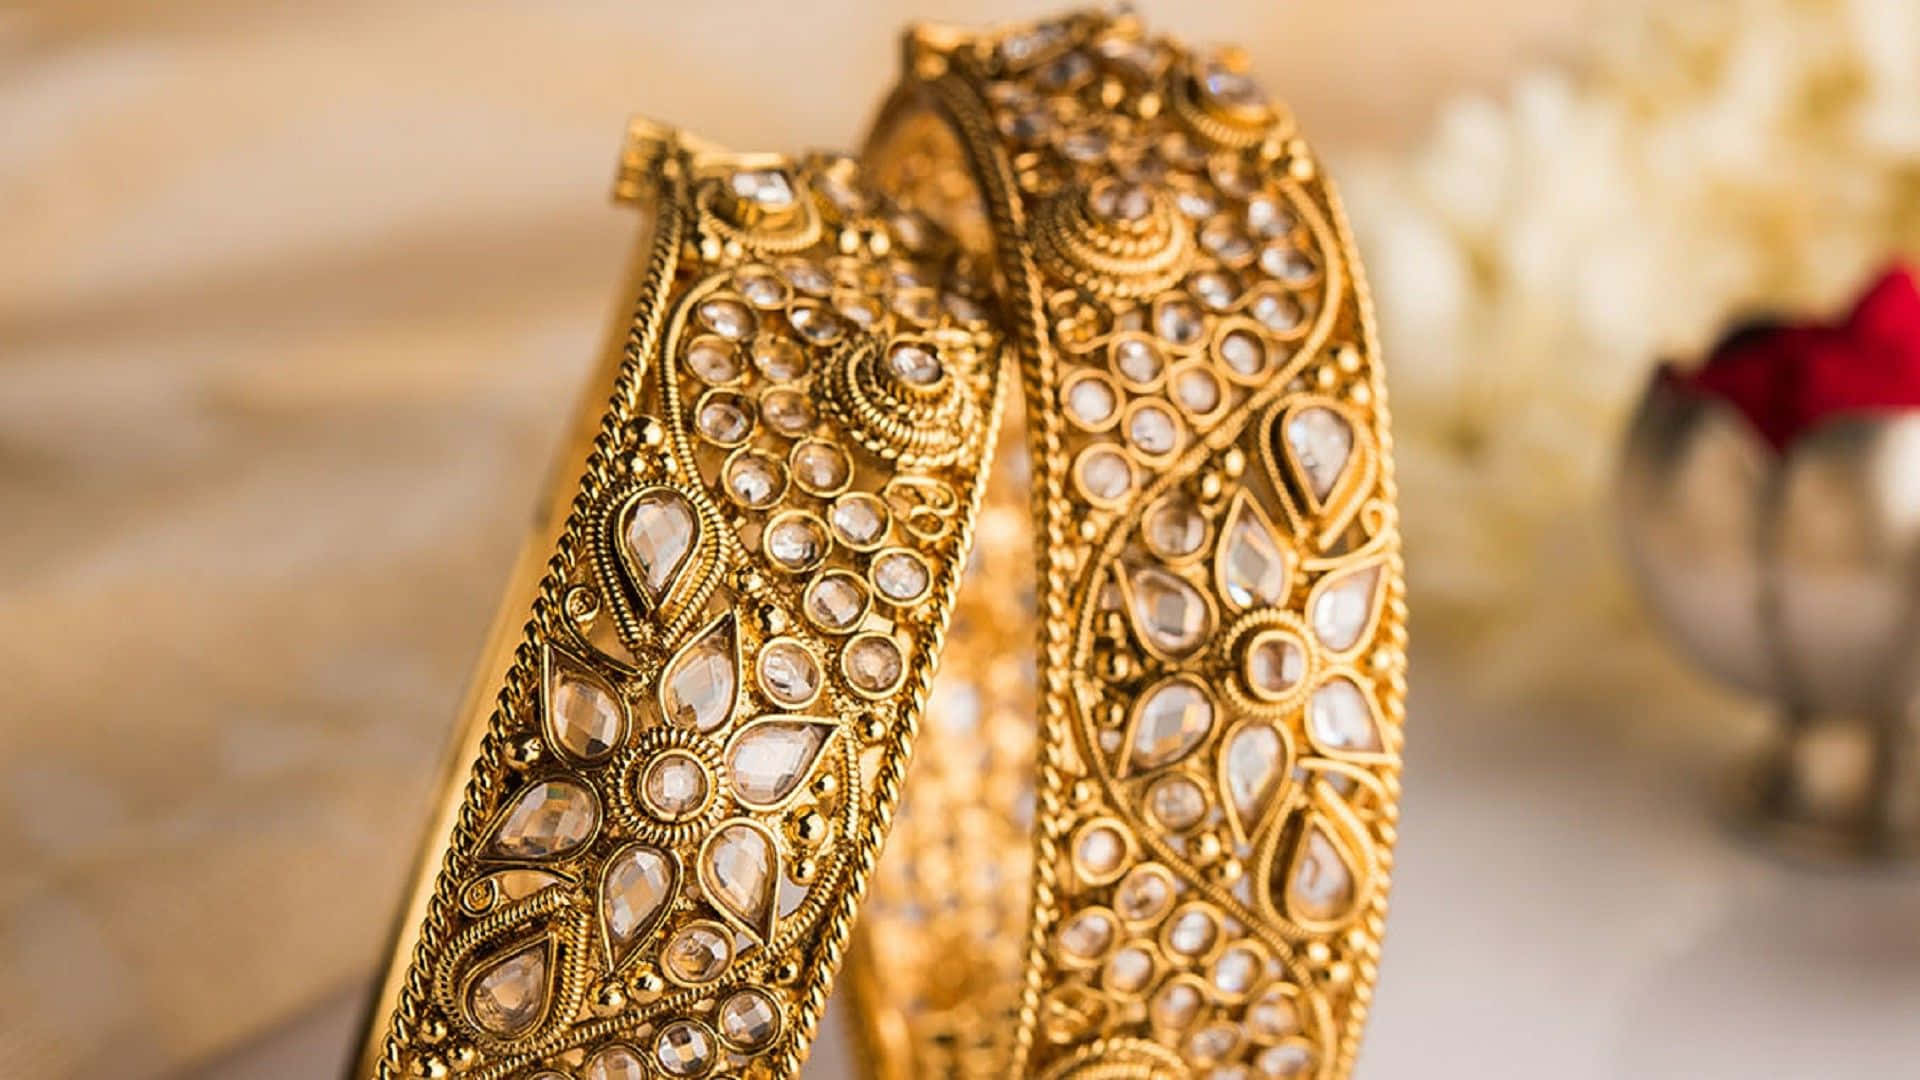 Gold Bangles With A Flower On Them